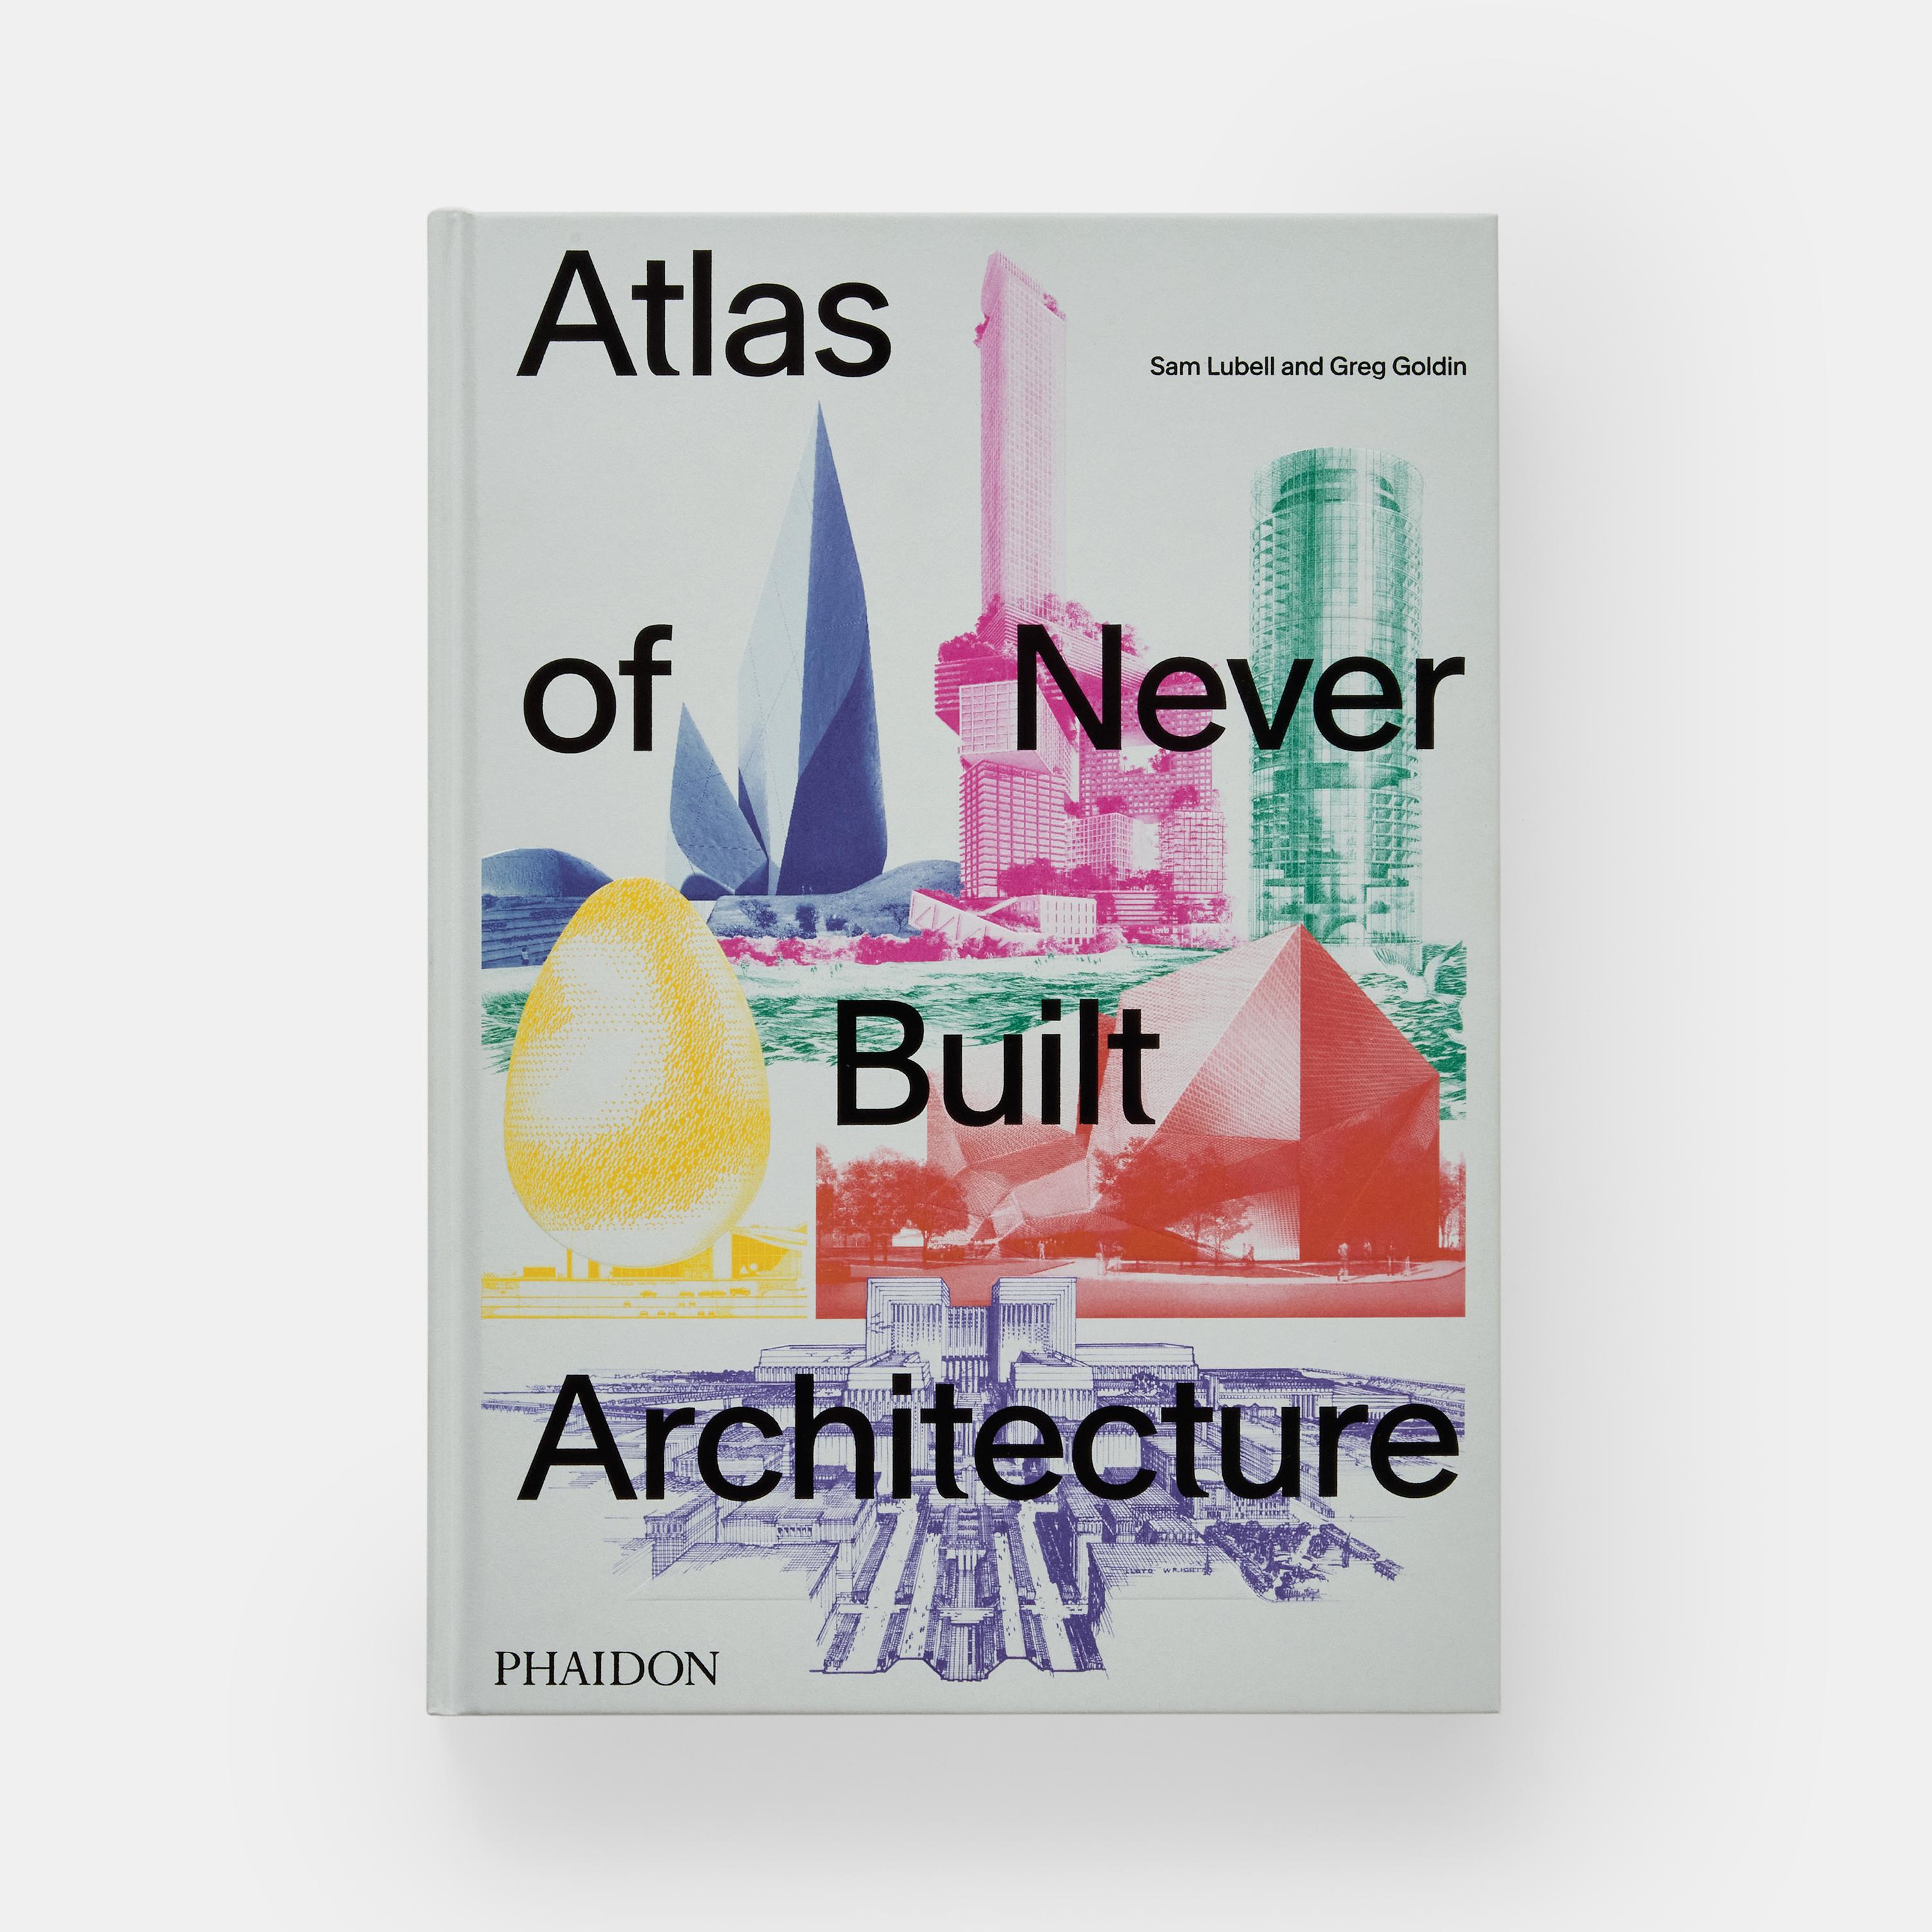 A comprehensive global survey of more than 300 extraordinary unbuilt architecture projects from the 20th century to the present day

The Atlas of Never Built Architecture features hundreds of the most spectacular unbuilt projects of the 20th and